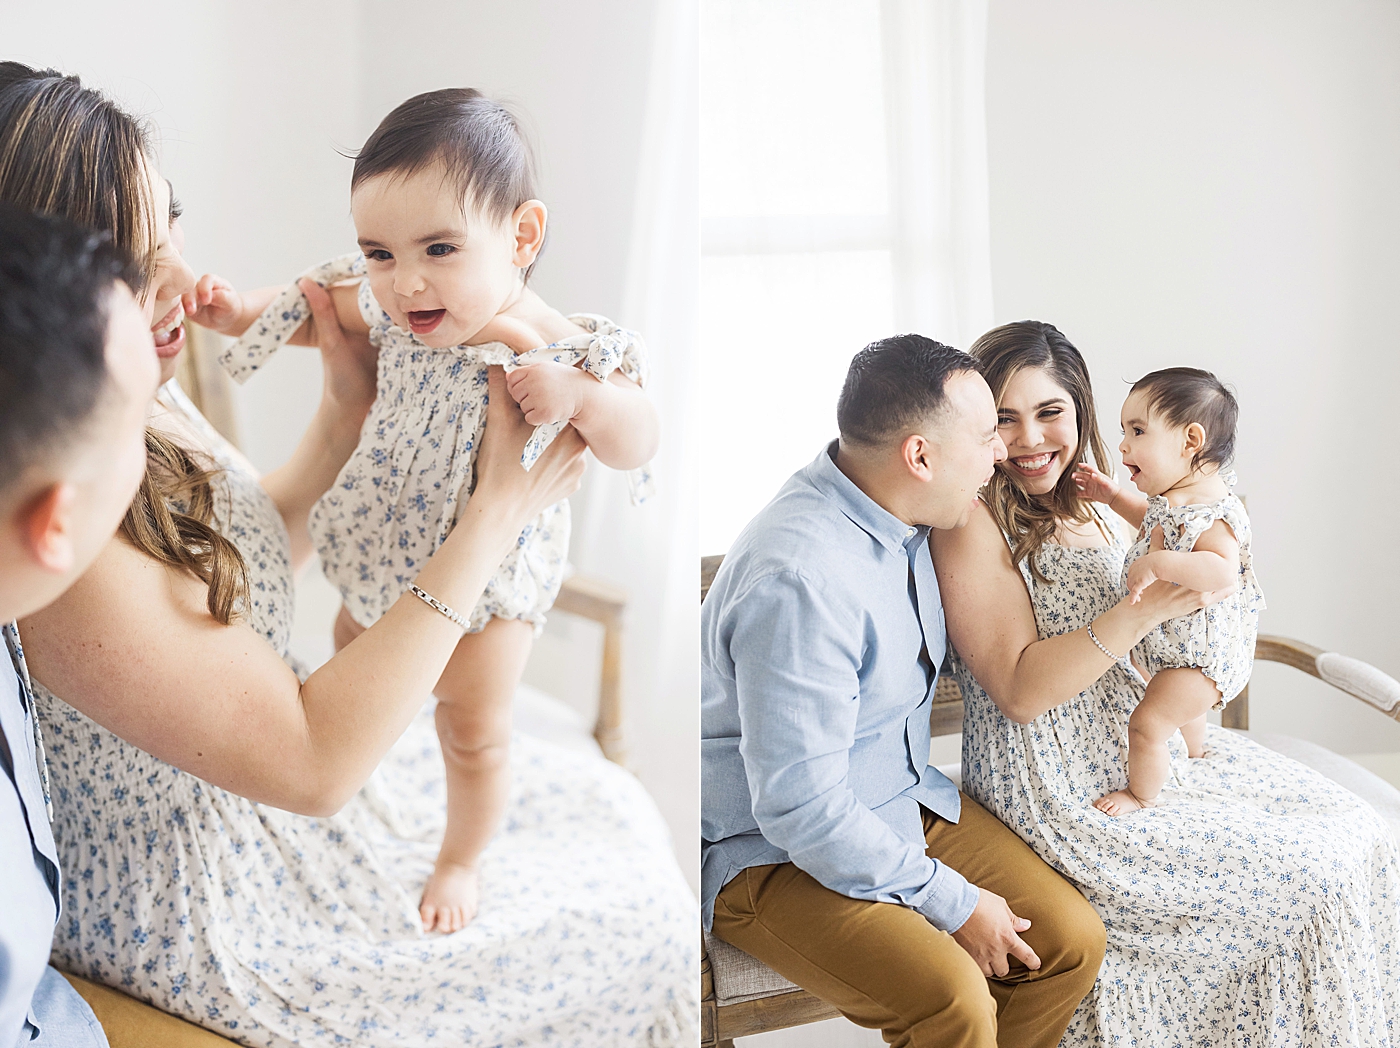 6 month milestone session in Houston Heights studio. Photo by Fresh Light Photography.